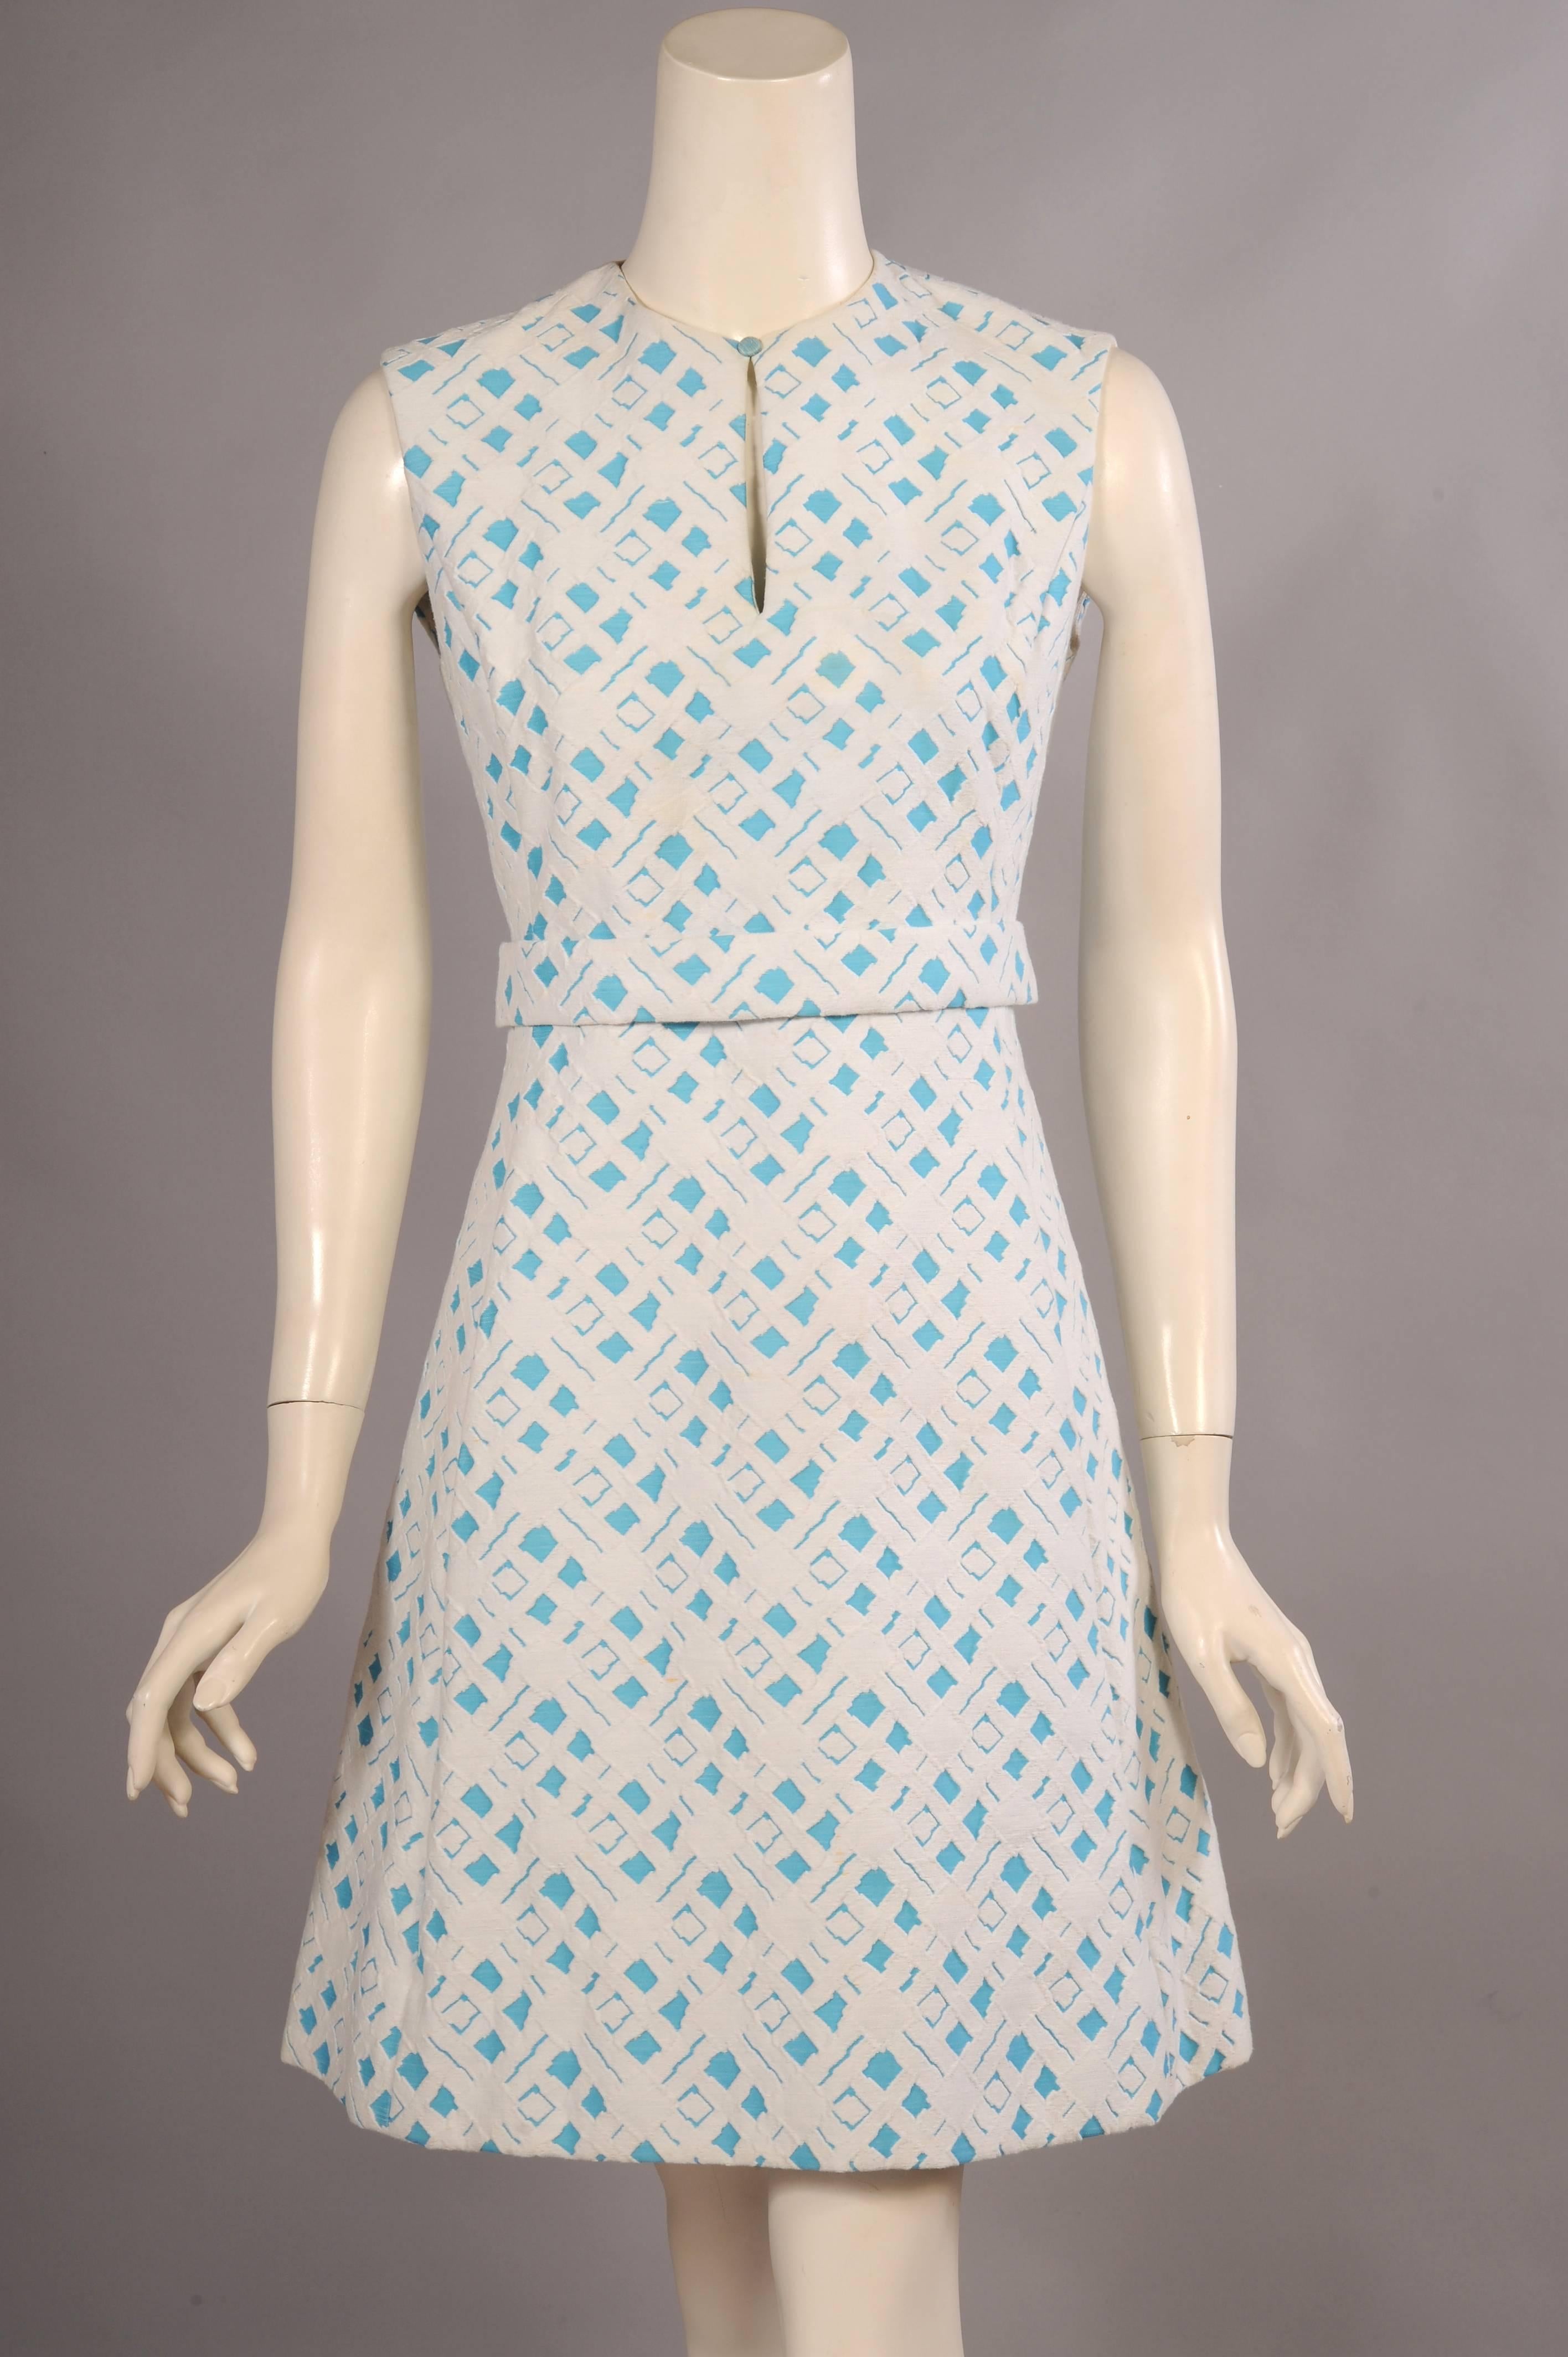 Crisp turquoise and white cotton matelassé is used for both pieces of this classic 1960's dress and coat ensemble from Ceil Chapman. The coat has a snap closure with five decorative jeweled buttons. There are two pockets concealed in the seams, and